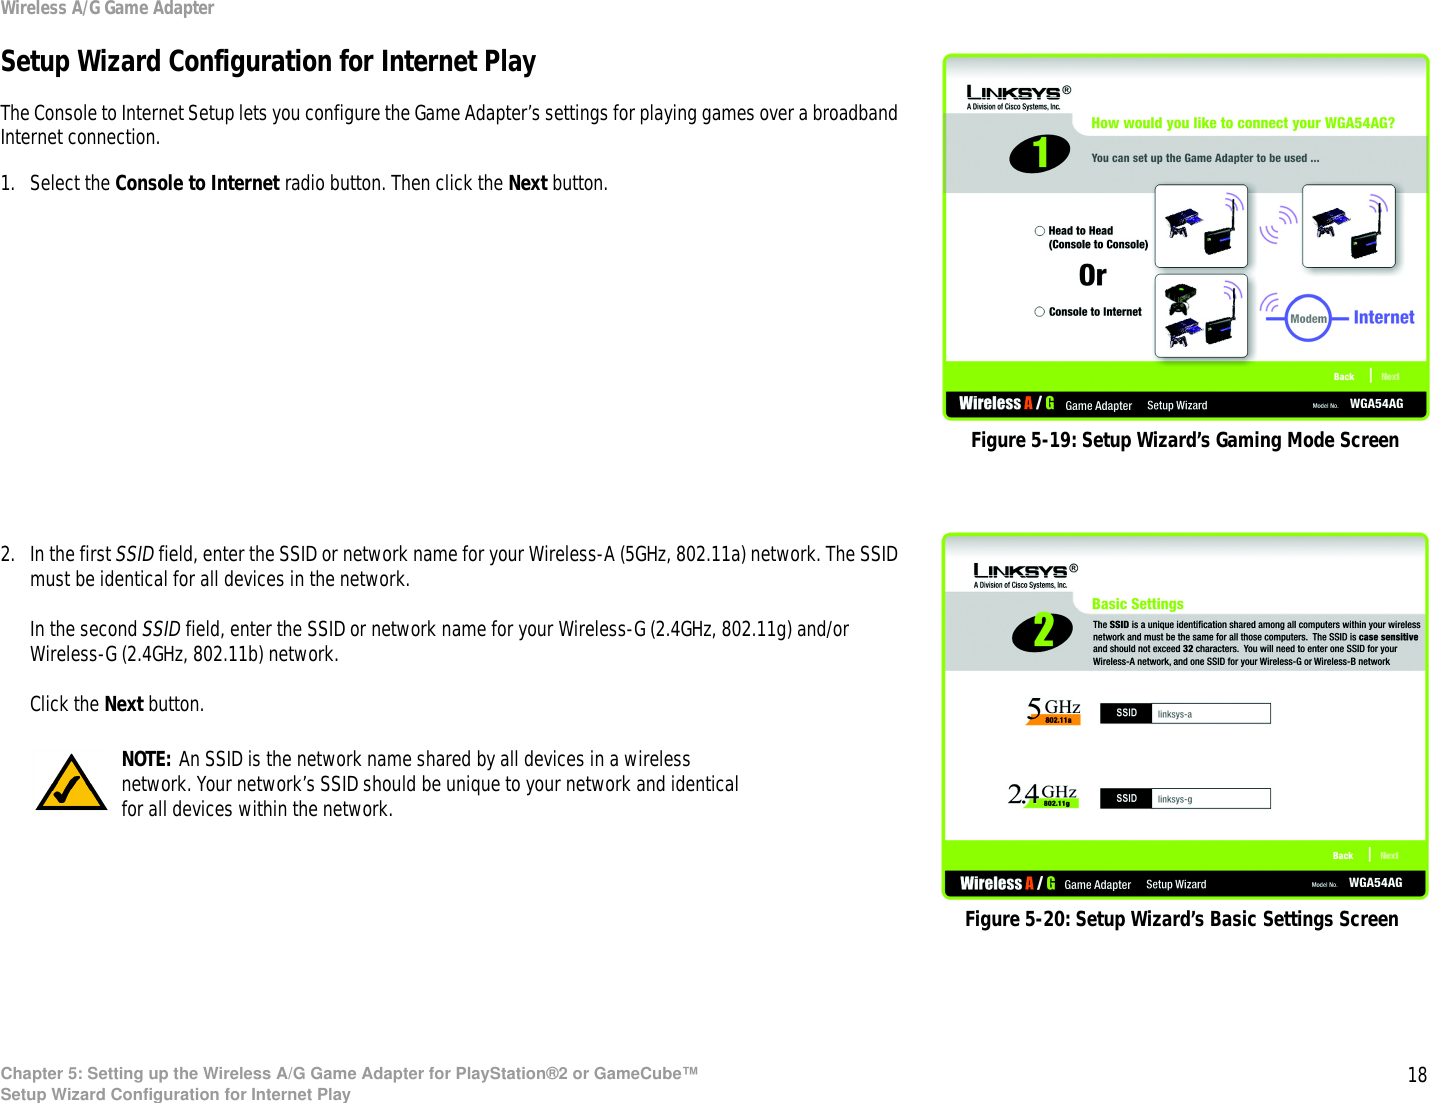 18Chapter 5: Setting up the Wireless A/G Game Adapter for PlayStation®2 or GameCube™Setup Wizard Configuration for Internet PlayWireless A/G Game AdapterSetup Wizard Configuration for Internet PlayThe Console to Internet Setup lets you configure the Game Adapter’s settings for playing games over a broadband Internet connection.1. Select the Console to Internet radio button. Then click the Next button.2. In the first SSID field, enter the SSID or network name for your Wireless-A (5GHz, 802.11a) network. The SSID must be identical for all devices in the network.In the second SSID field, enter the SSID or network name for your Wireless-G (2.4GHz, 802.11g) and/or Wireless-G (2.4GHz, 802.11b) network.Click the Next button.Figure 5-19: Setup Wizard’s Gaming Mode ScreenFigure 5-20: Setup Wizard’s Basic Settings ScreenNOTE: An SSID is the network name shared by all devices in a wireless network. Your network’s SSID should be unique to your network and identical for all devices within the network.